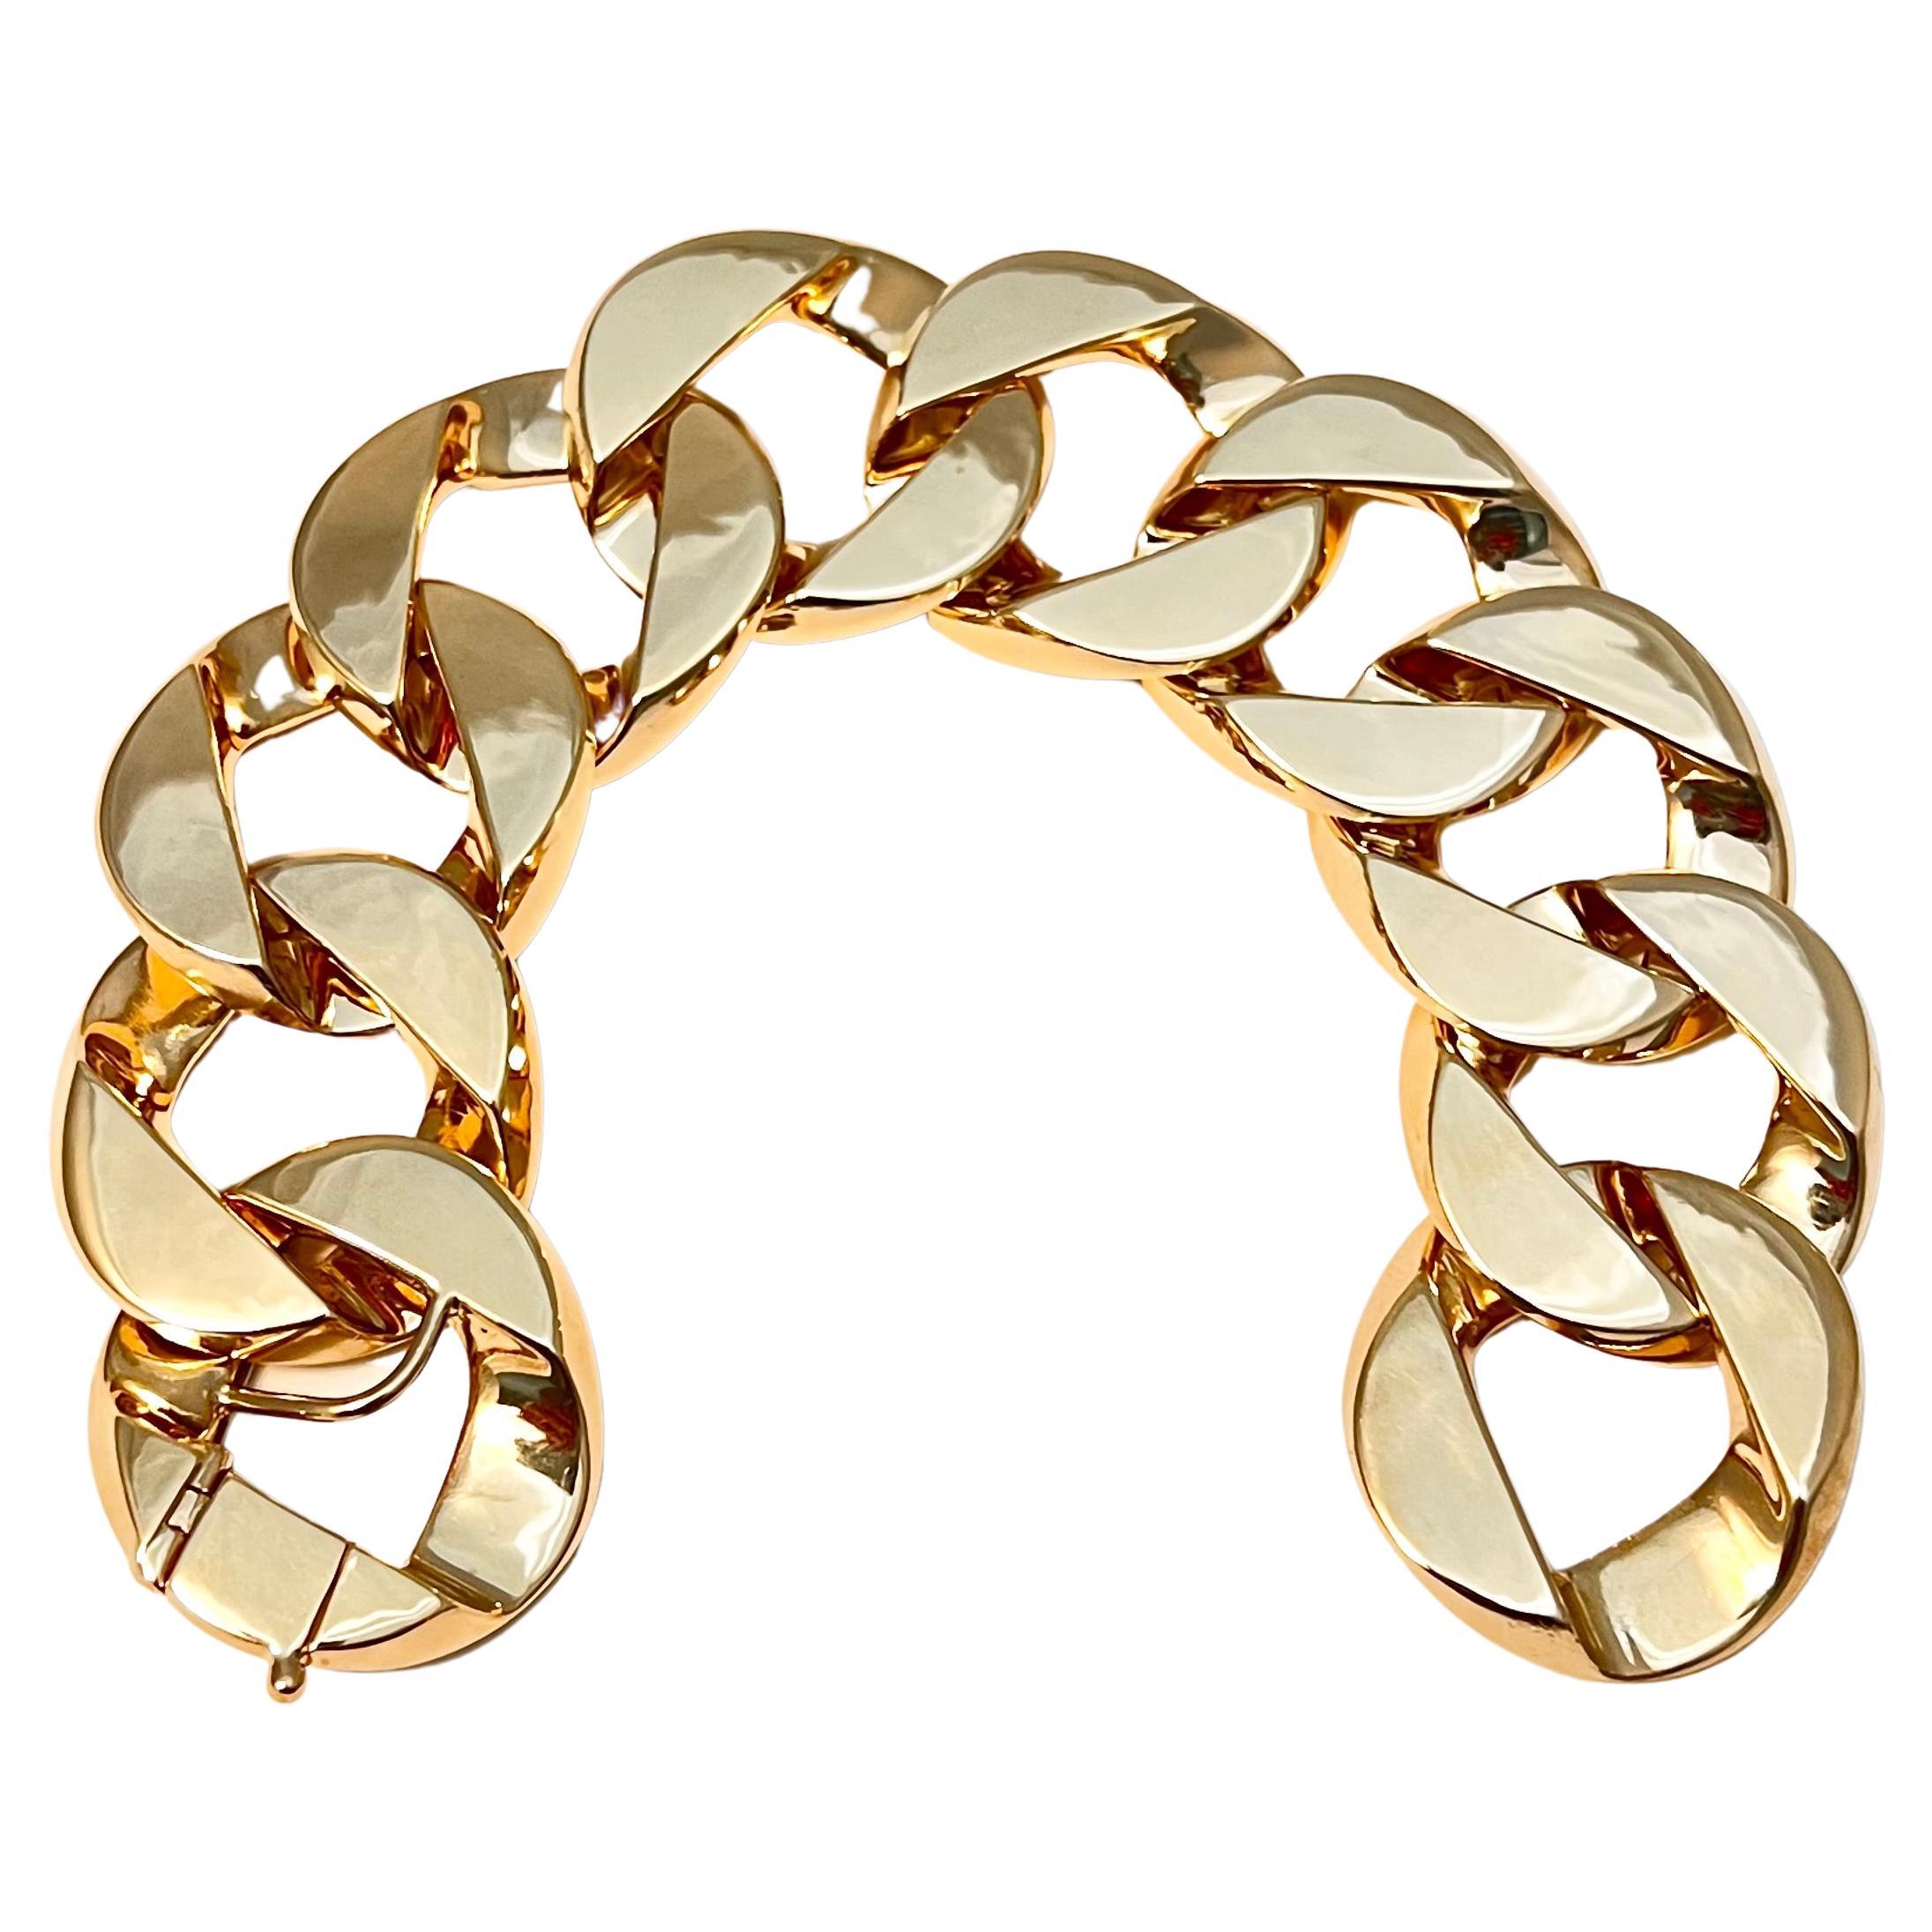 Verdura larger-sized curb-link bracelet in high-polished 14k yellow gold, secured by a hidden clasp.  26mm wide links and measuring 7.5